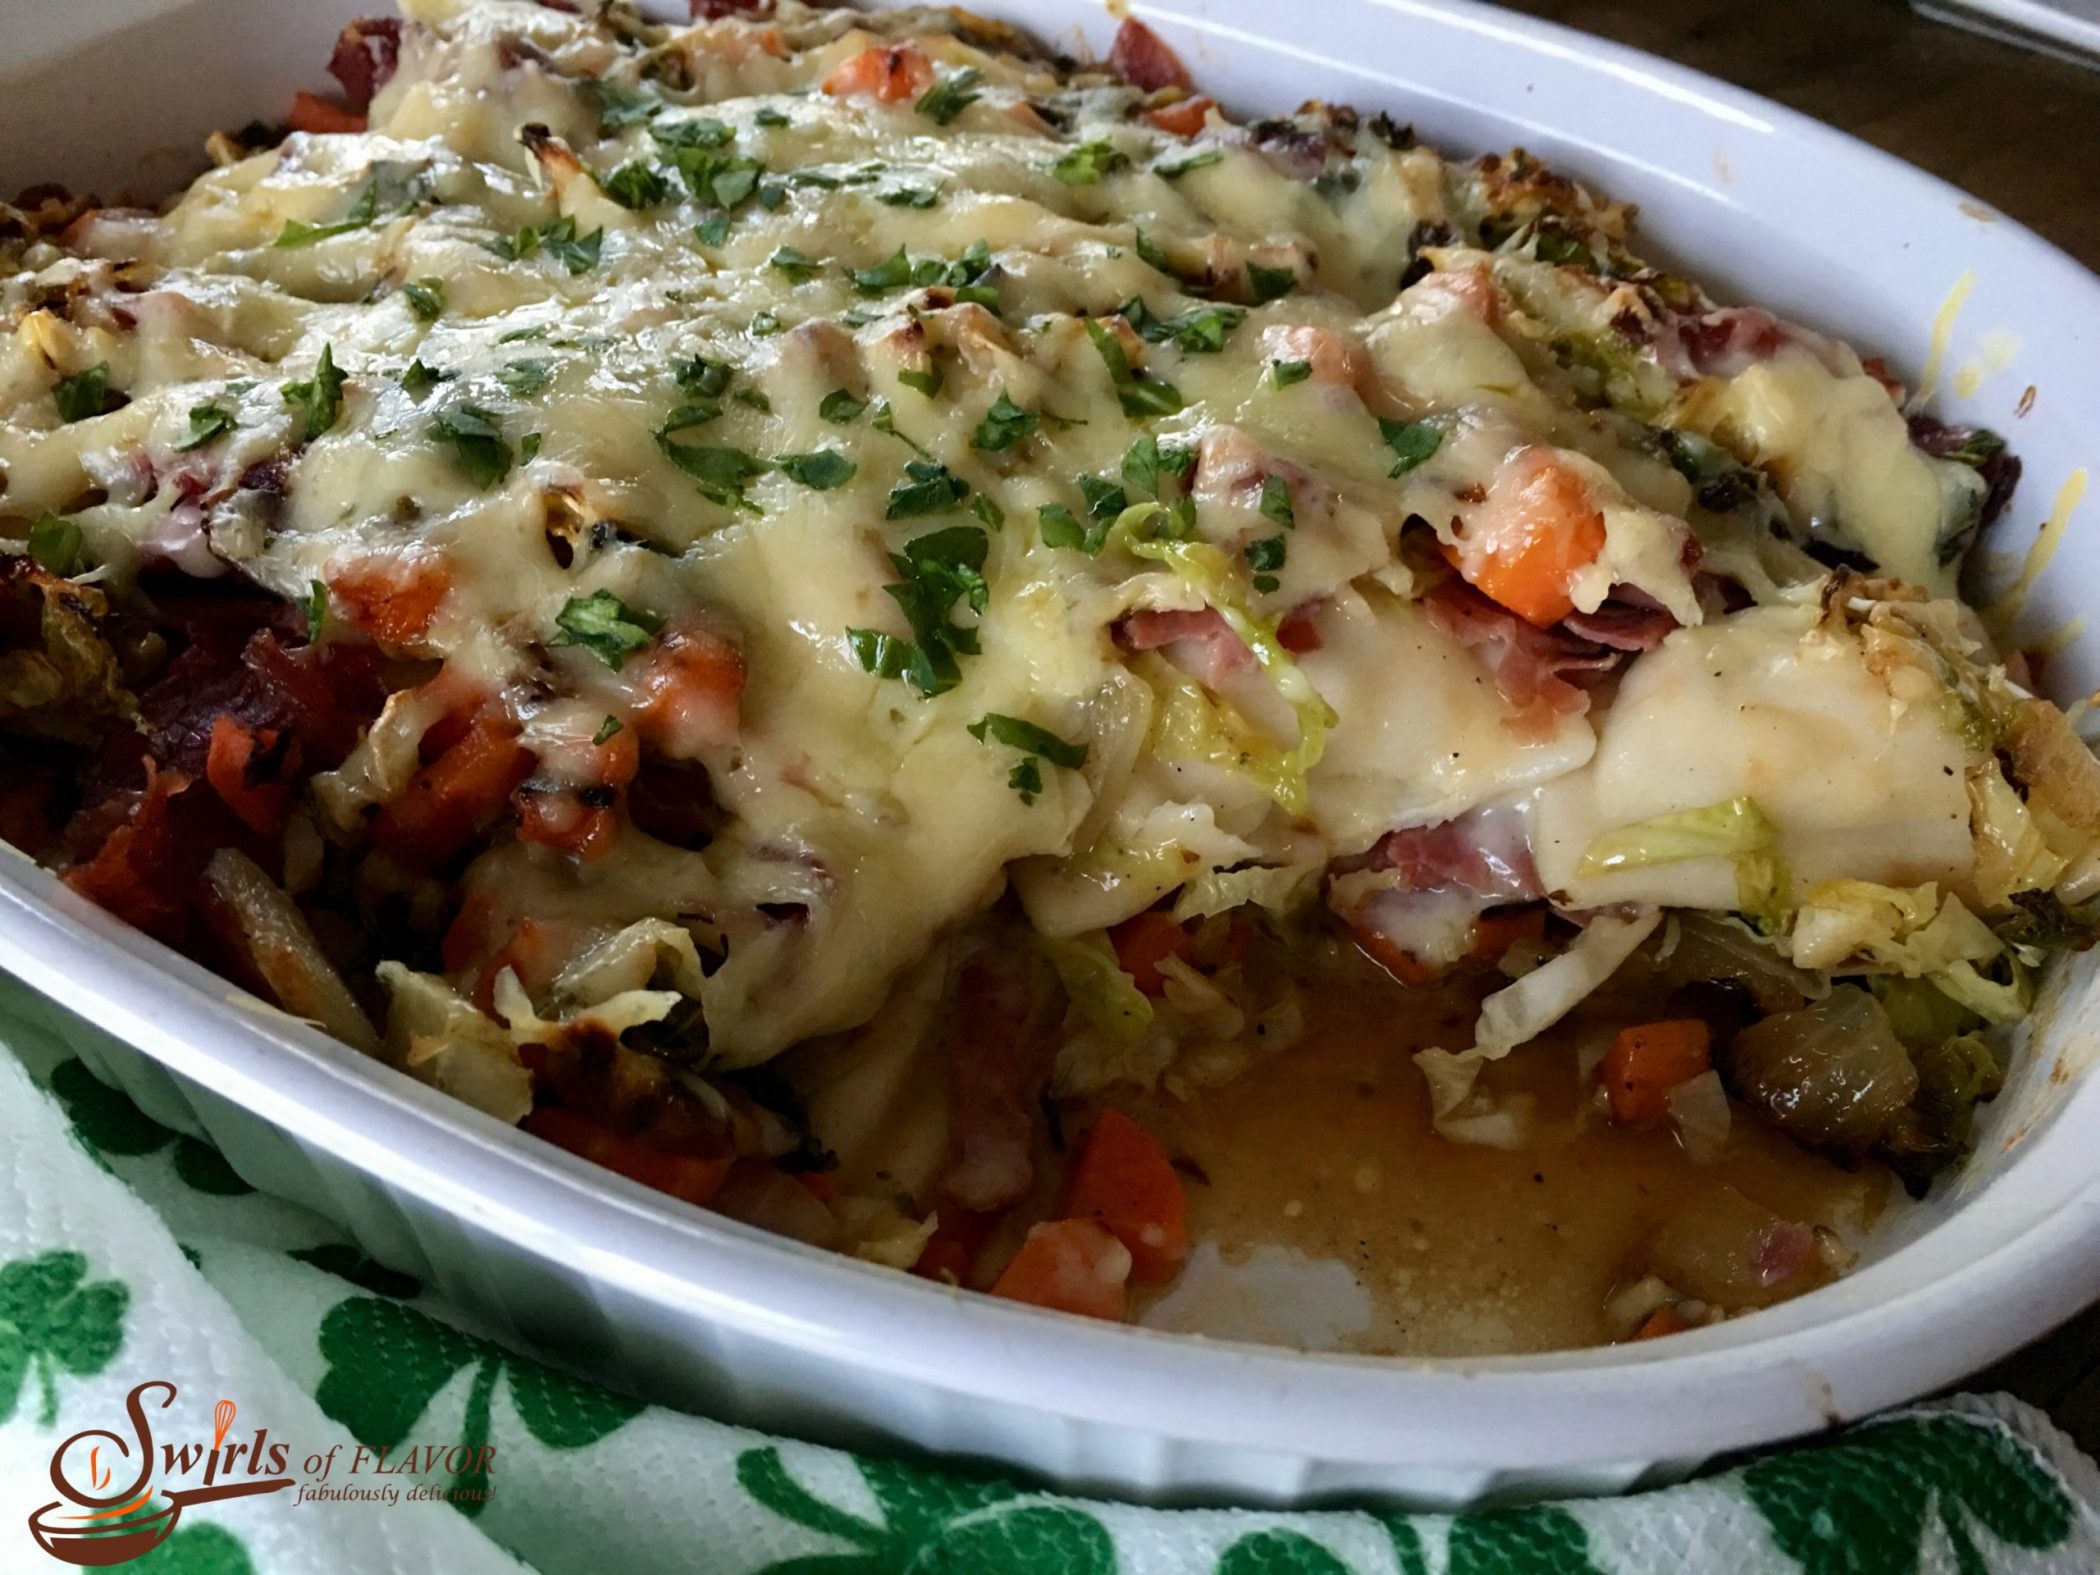 Corned Beef Casserole With Cabbage combines all the flavors of your St. Patrick's Day dinner in one dish. Cabbage, carrots and sweet onions sauteed in a Guinness reduction are layered with cheddar and potato filled pierogies, corned beef and aged Irish cheddar cheese. #cornedbeef #cabbage #cornedbeefandcabbage #casserole #dinner #irish #stpatricksday #easyrecipe #dinner #swirlsofflavor